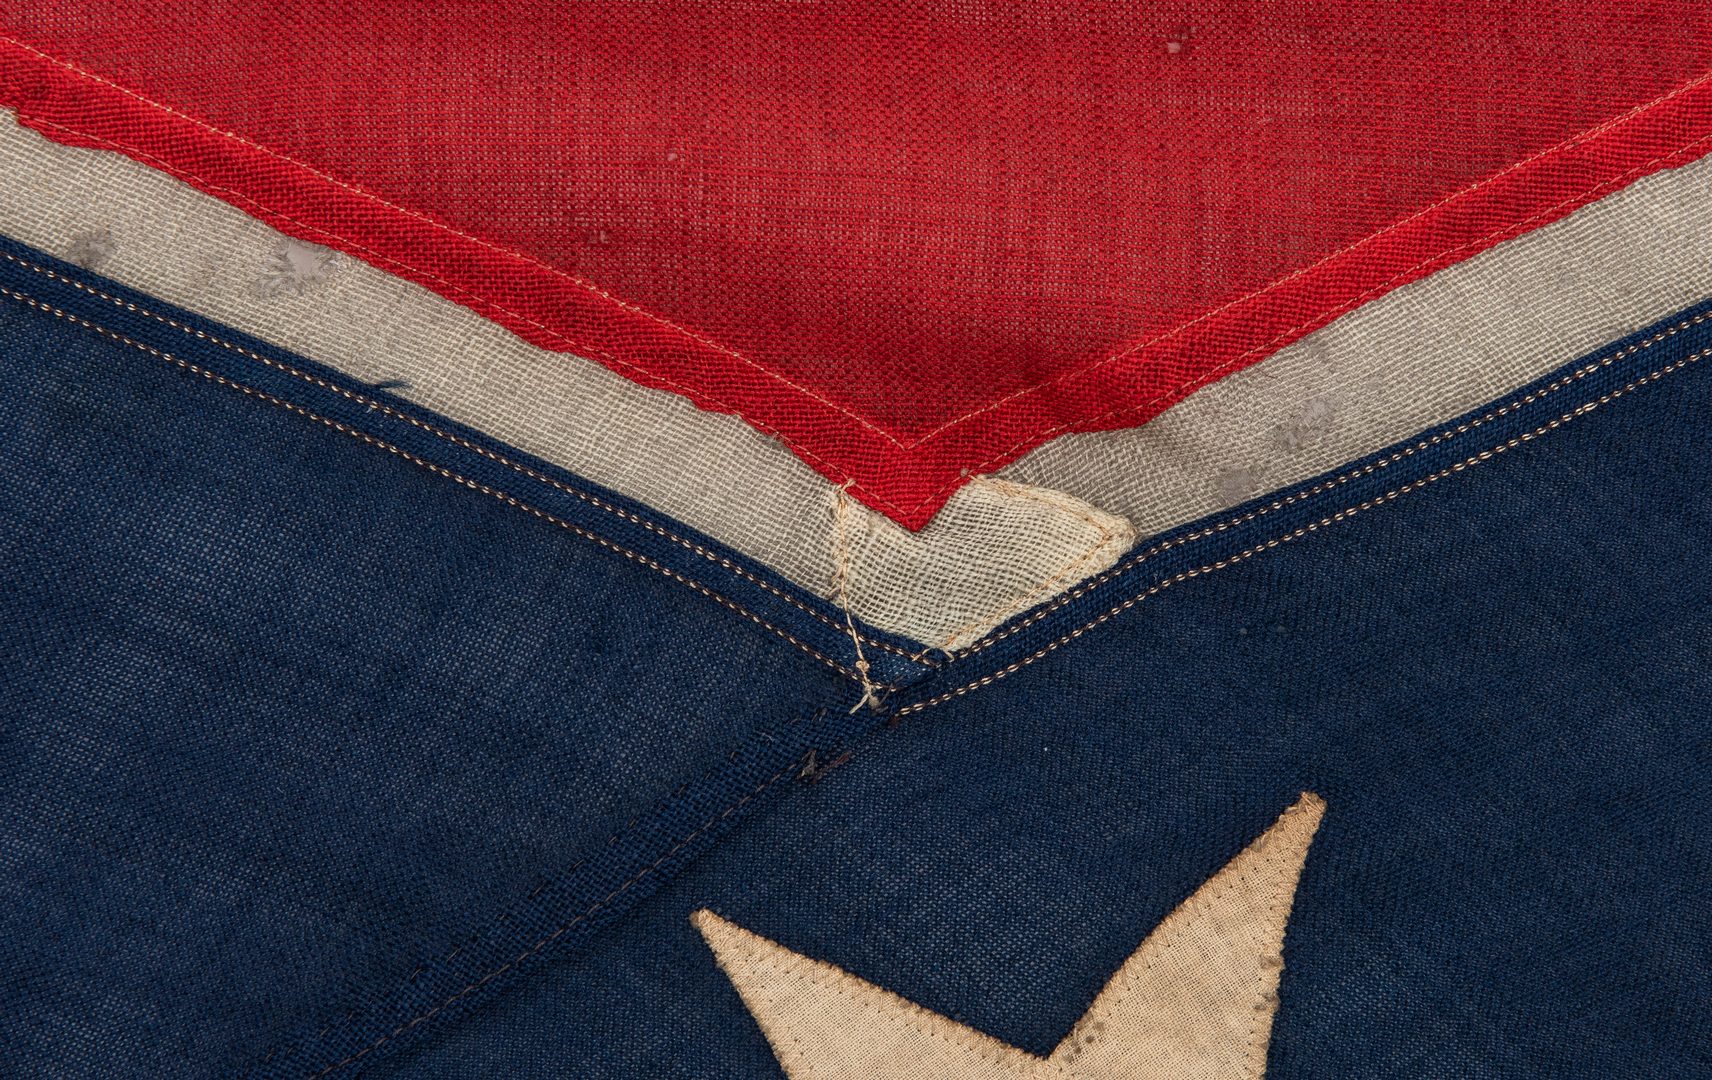 Lot 390: Confederate Reunion Flag or Banner